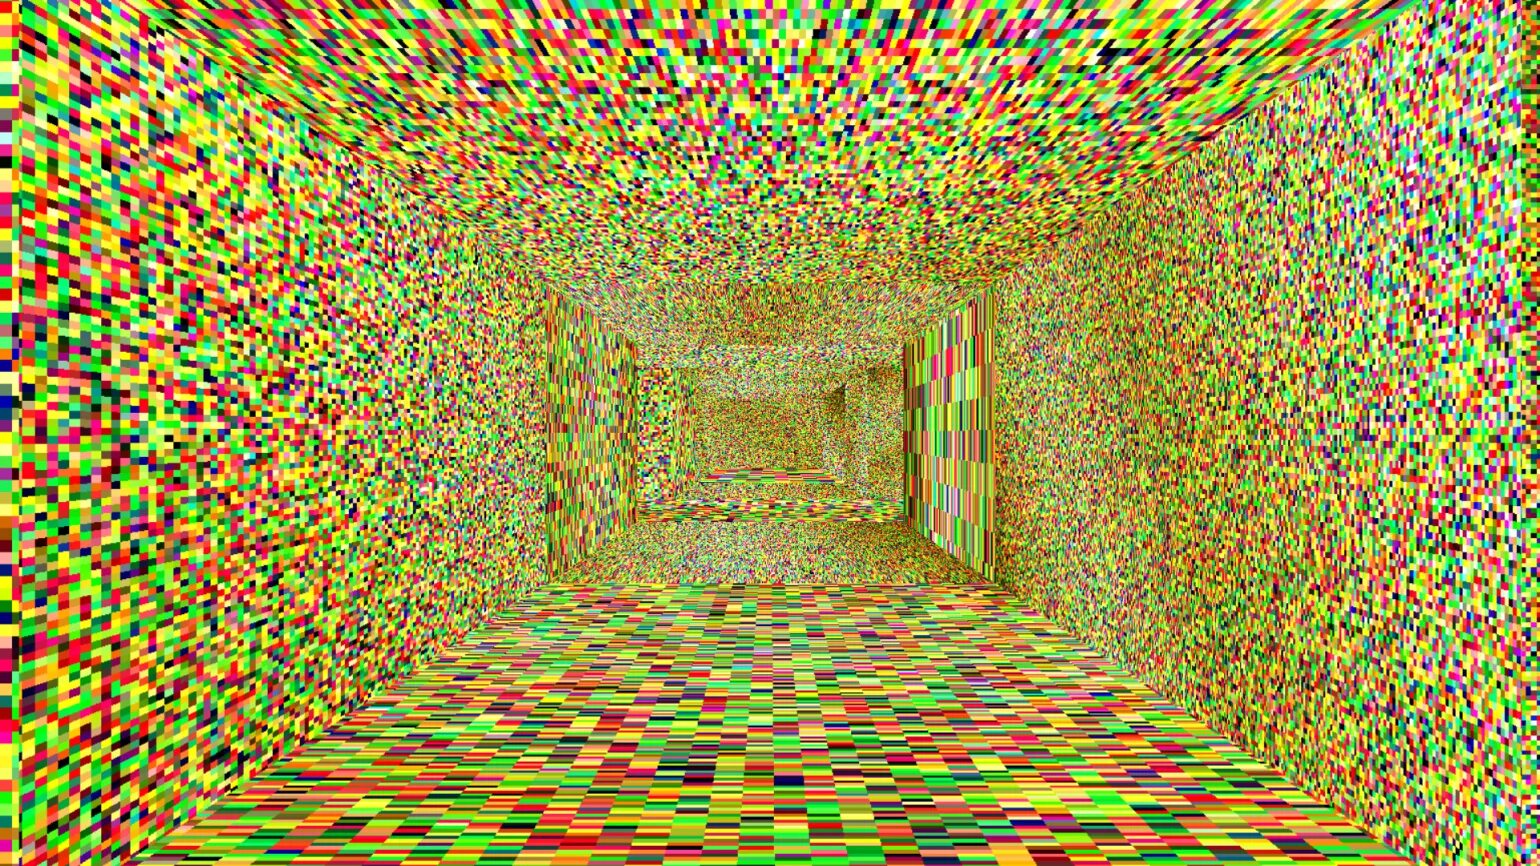 The catacombs of solaris revisited. Catacombs of Solaris. Solaris катакомбы. Catacombs of Solaris texture.